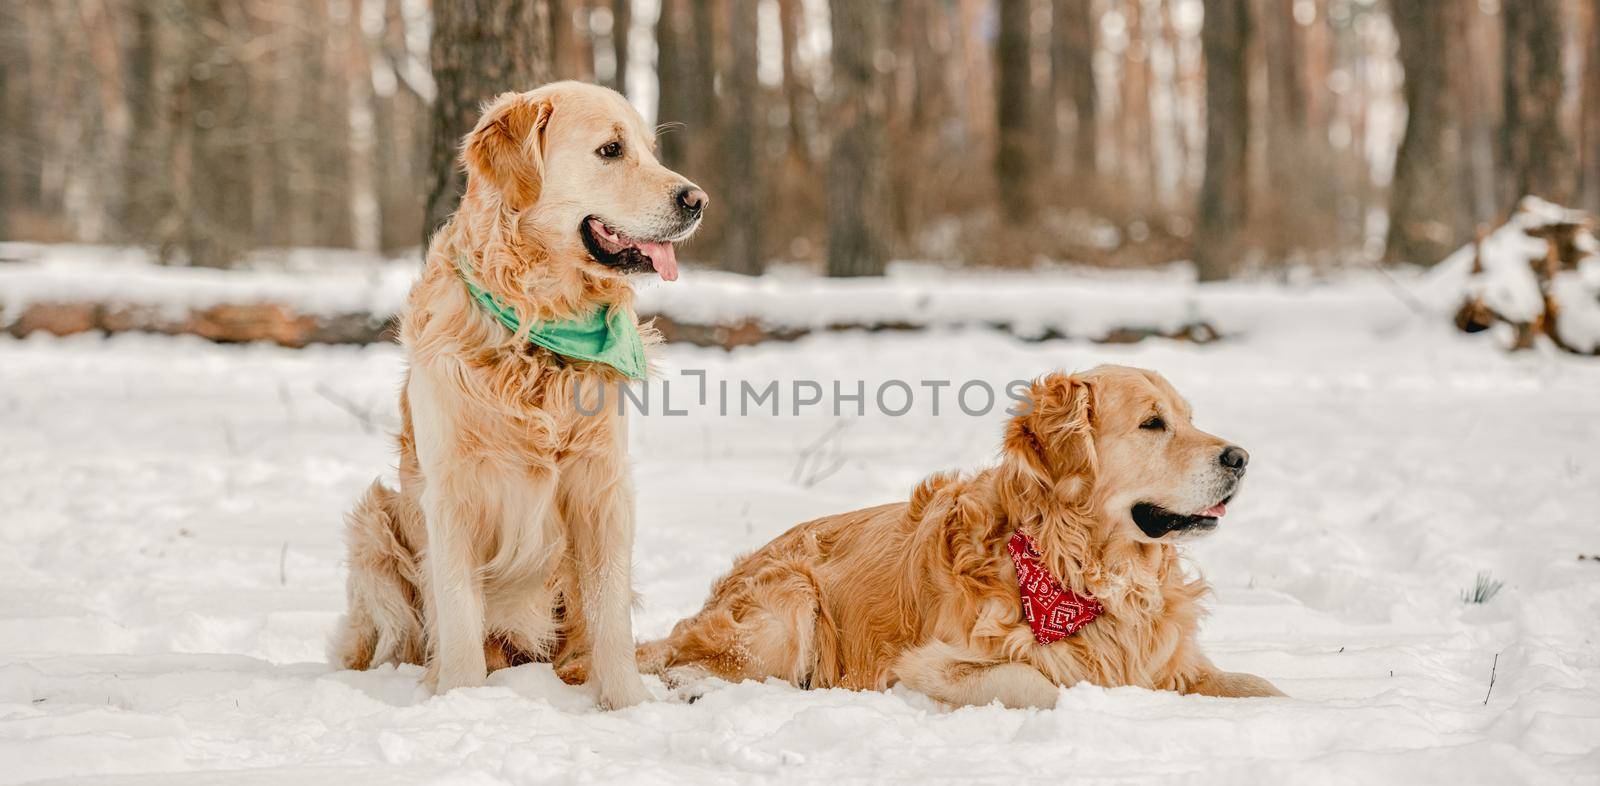 Golden retriever dogs sitting in winter time in snow and enjoying walk together. Adorable purebred doggy pet labradors in cold weather at nature